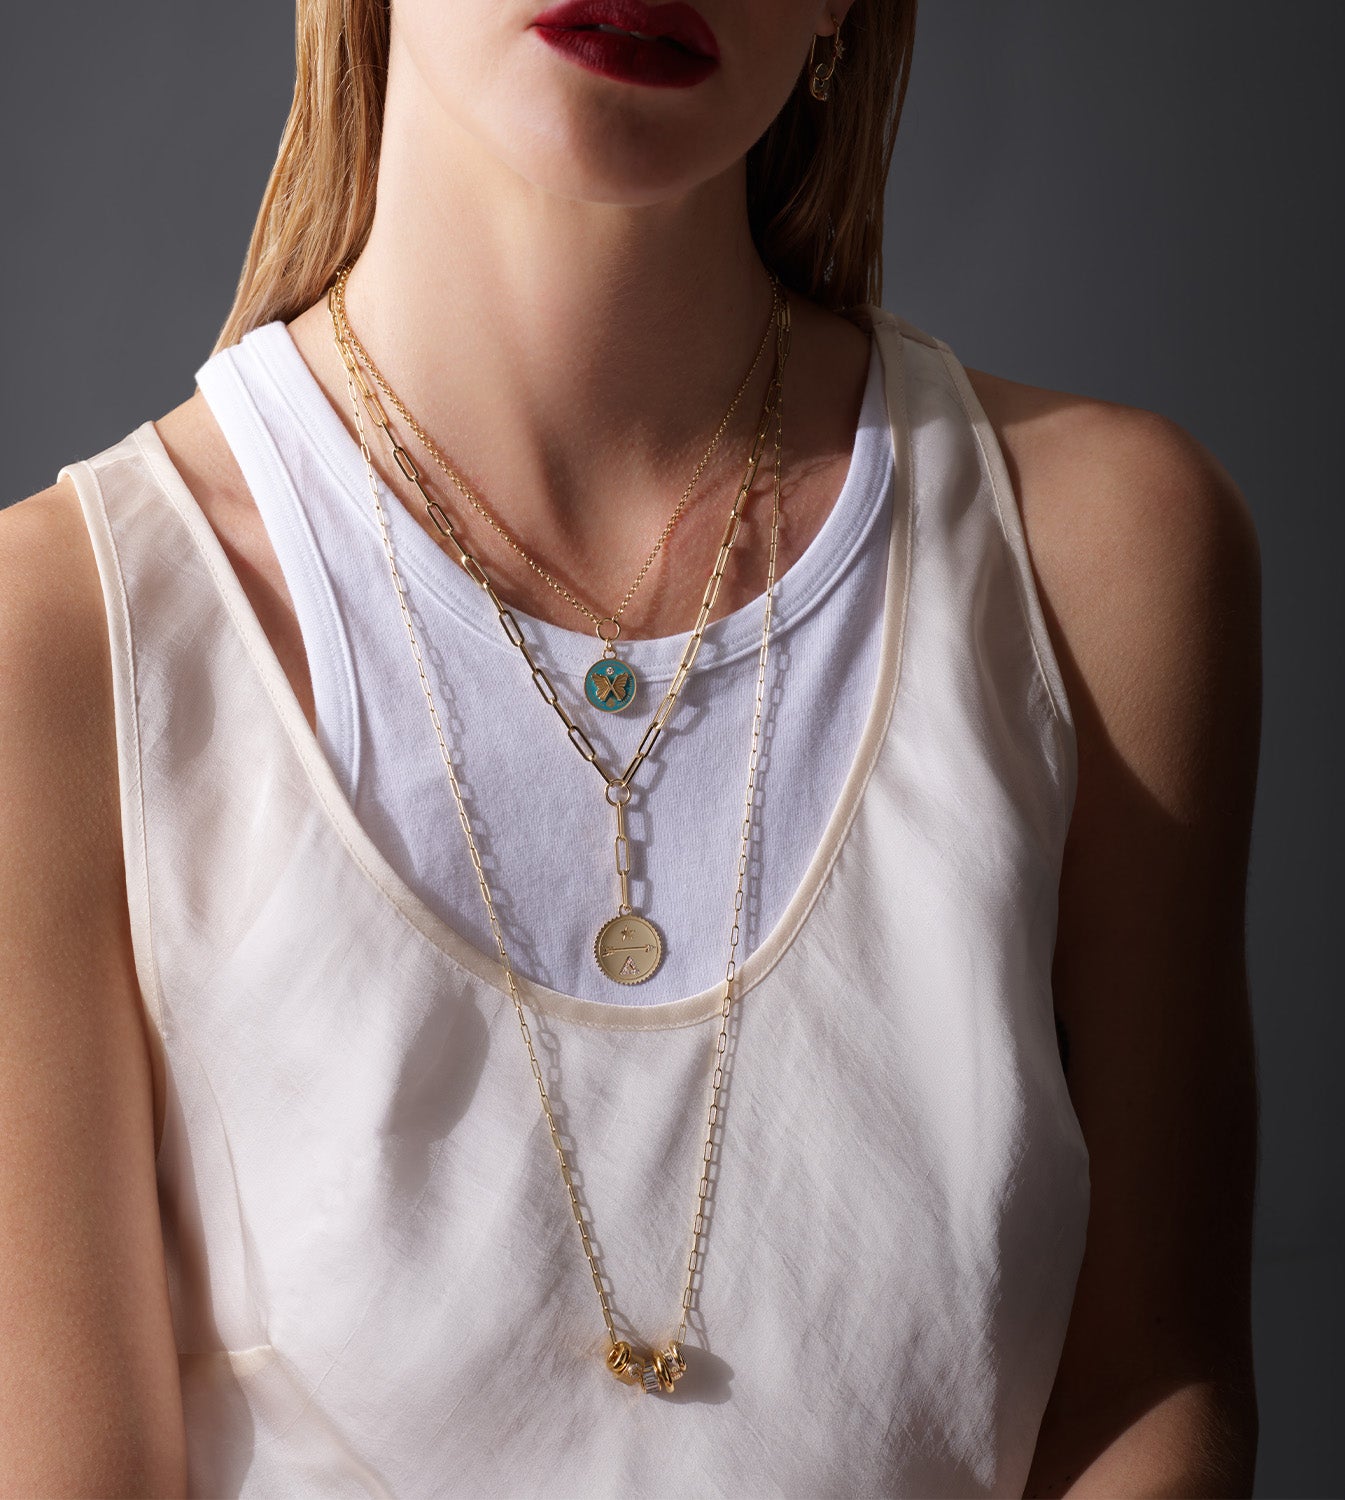 Reverie : Small Belcher Chain Necklace